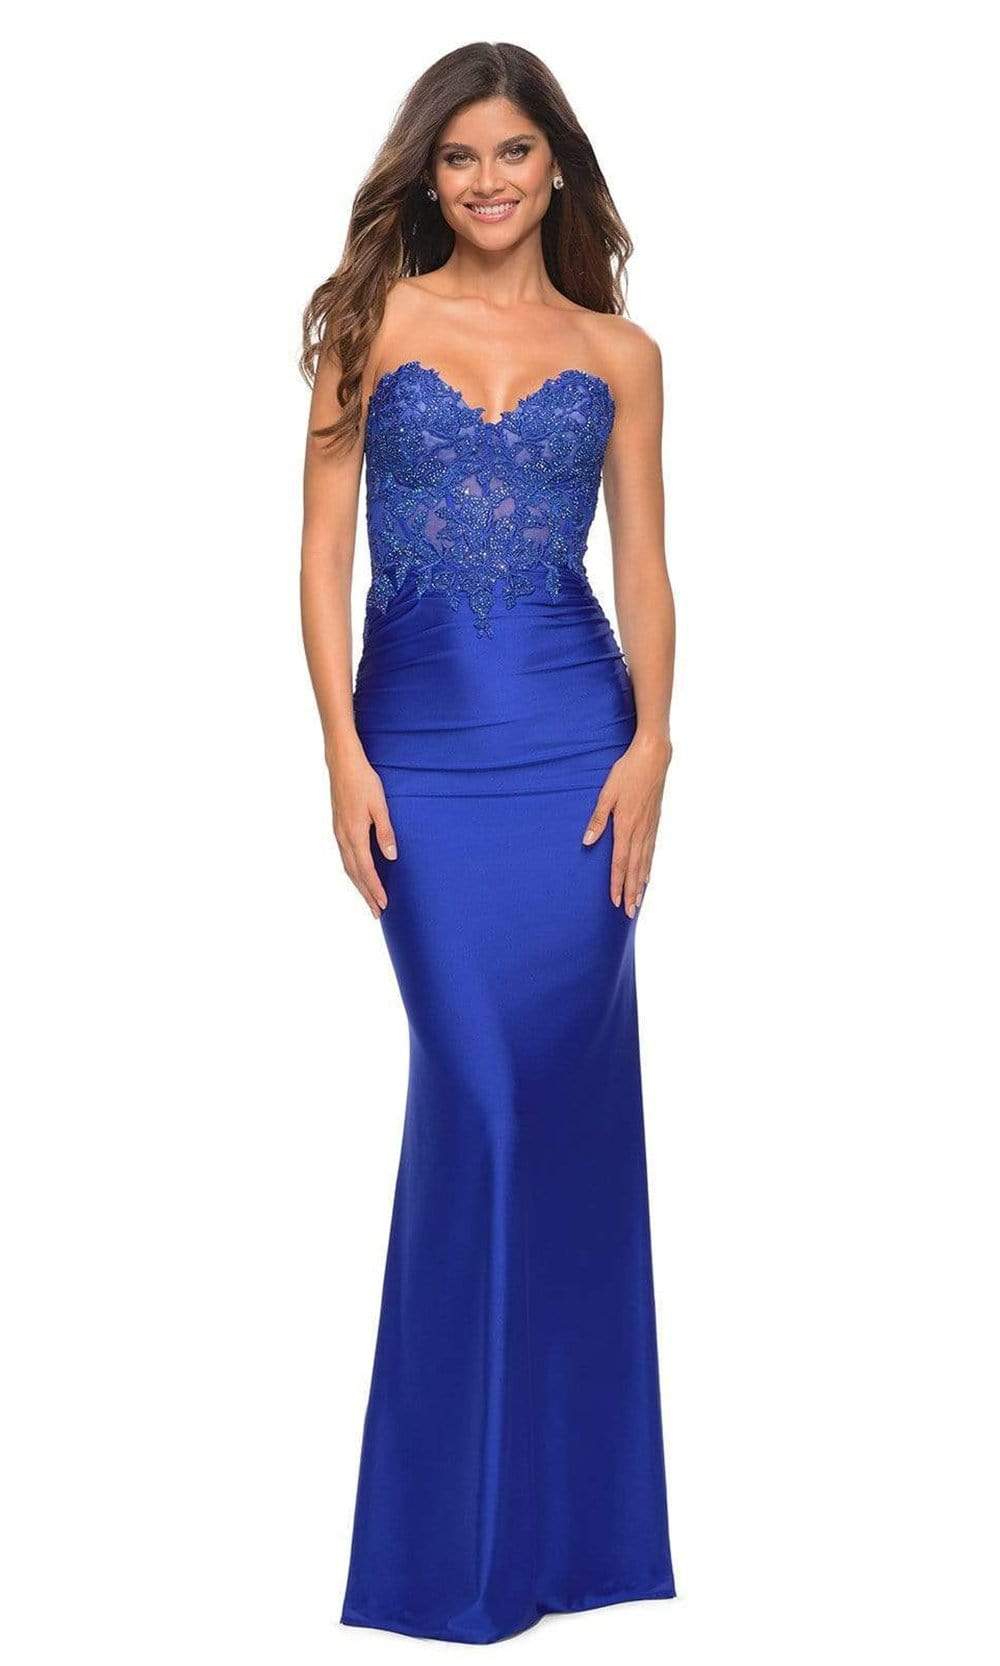 La Femme - 30720 Beaded Lace Jersey Gown Special Occasion Dress 00 / Royal Blue